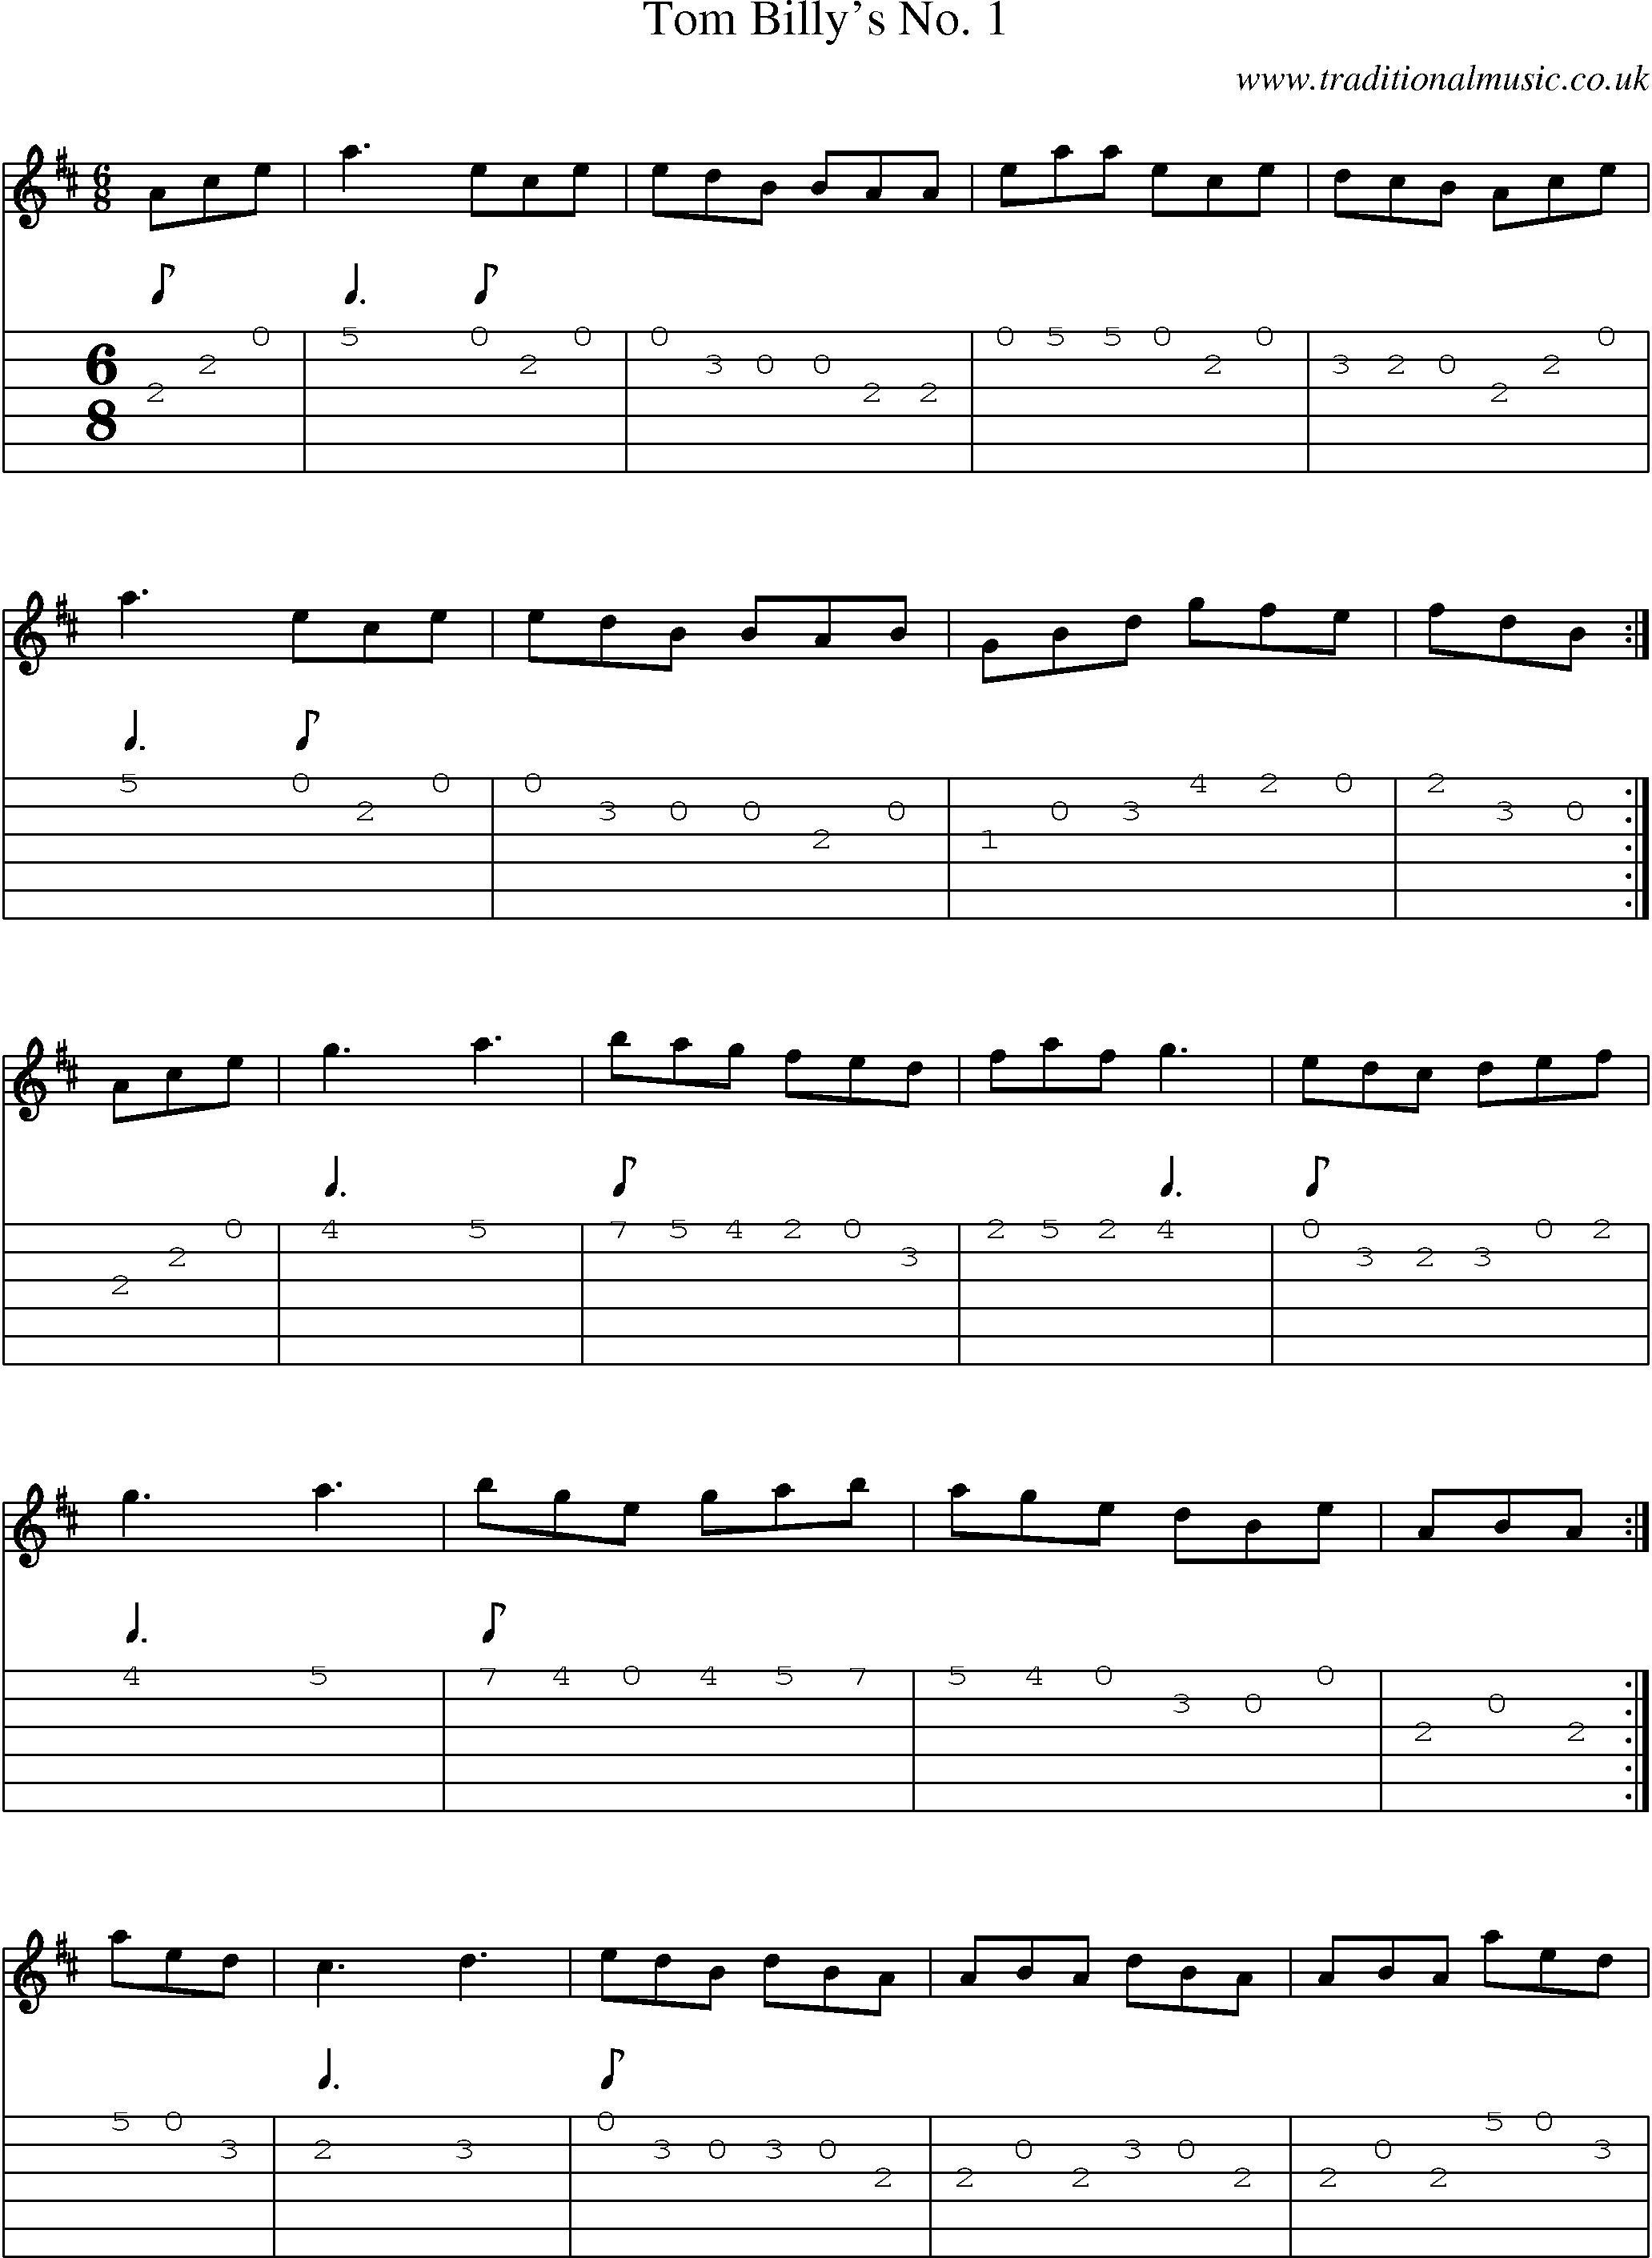 Music Score and Guitar Tabs for Tom Billys No 1